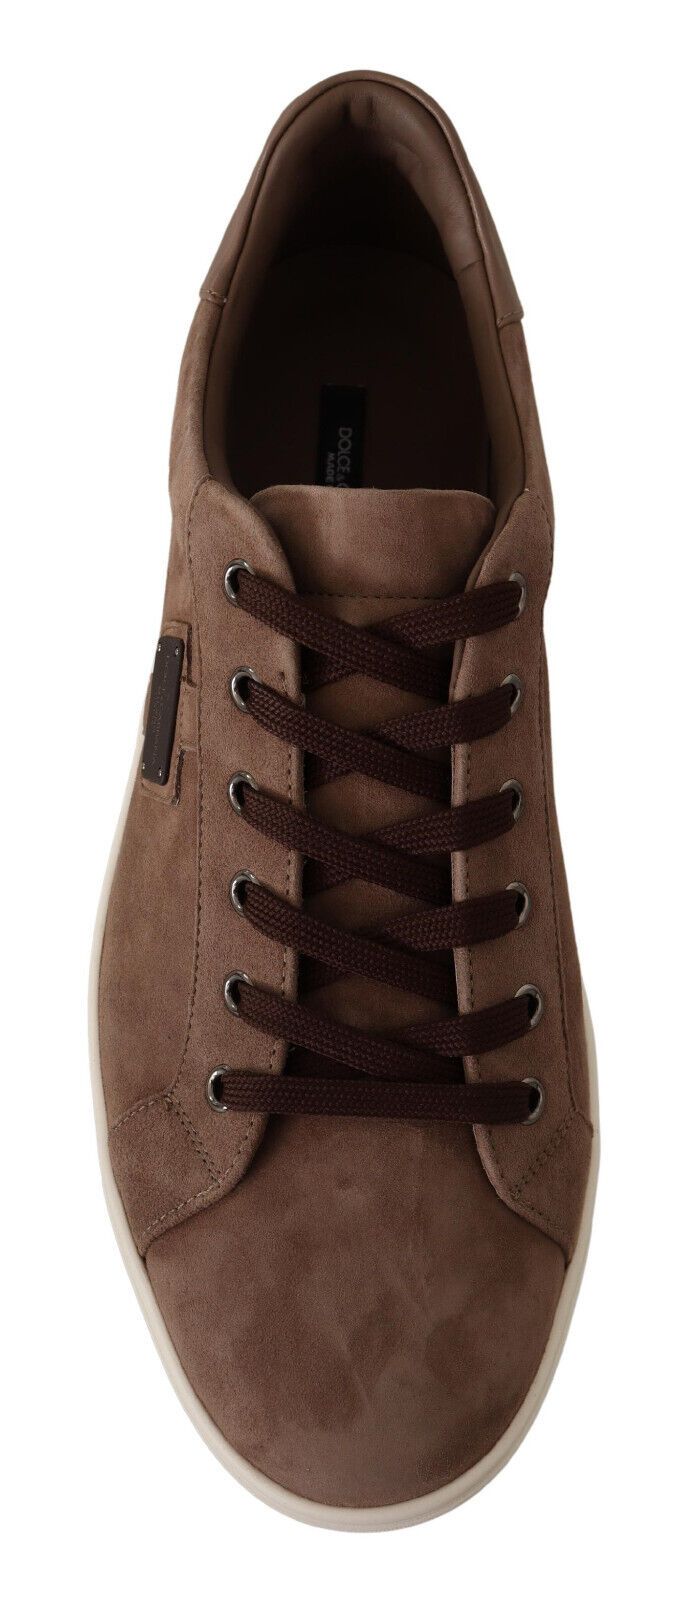 Dolce & Gabbana Brown Suede Leather Sneakers Shoes | Fashionsarah.com